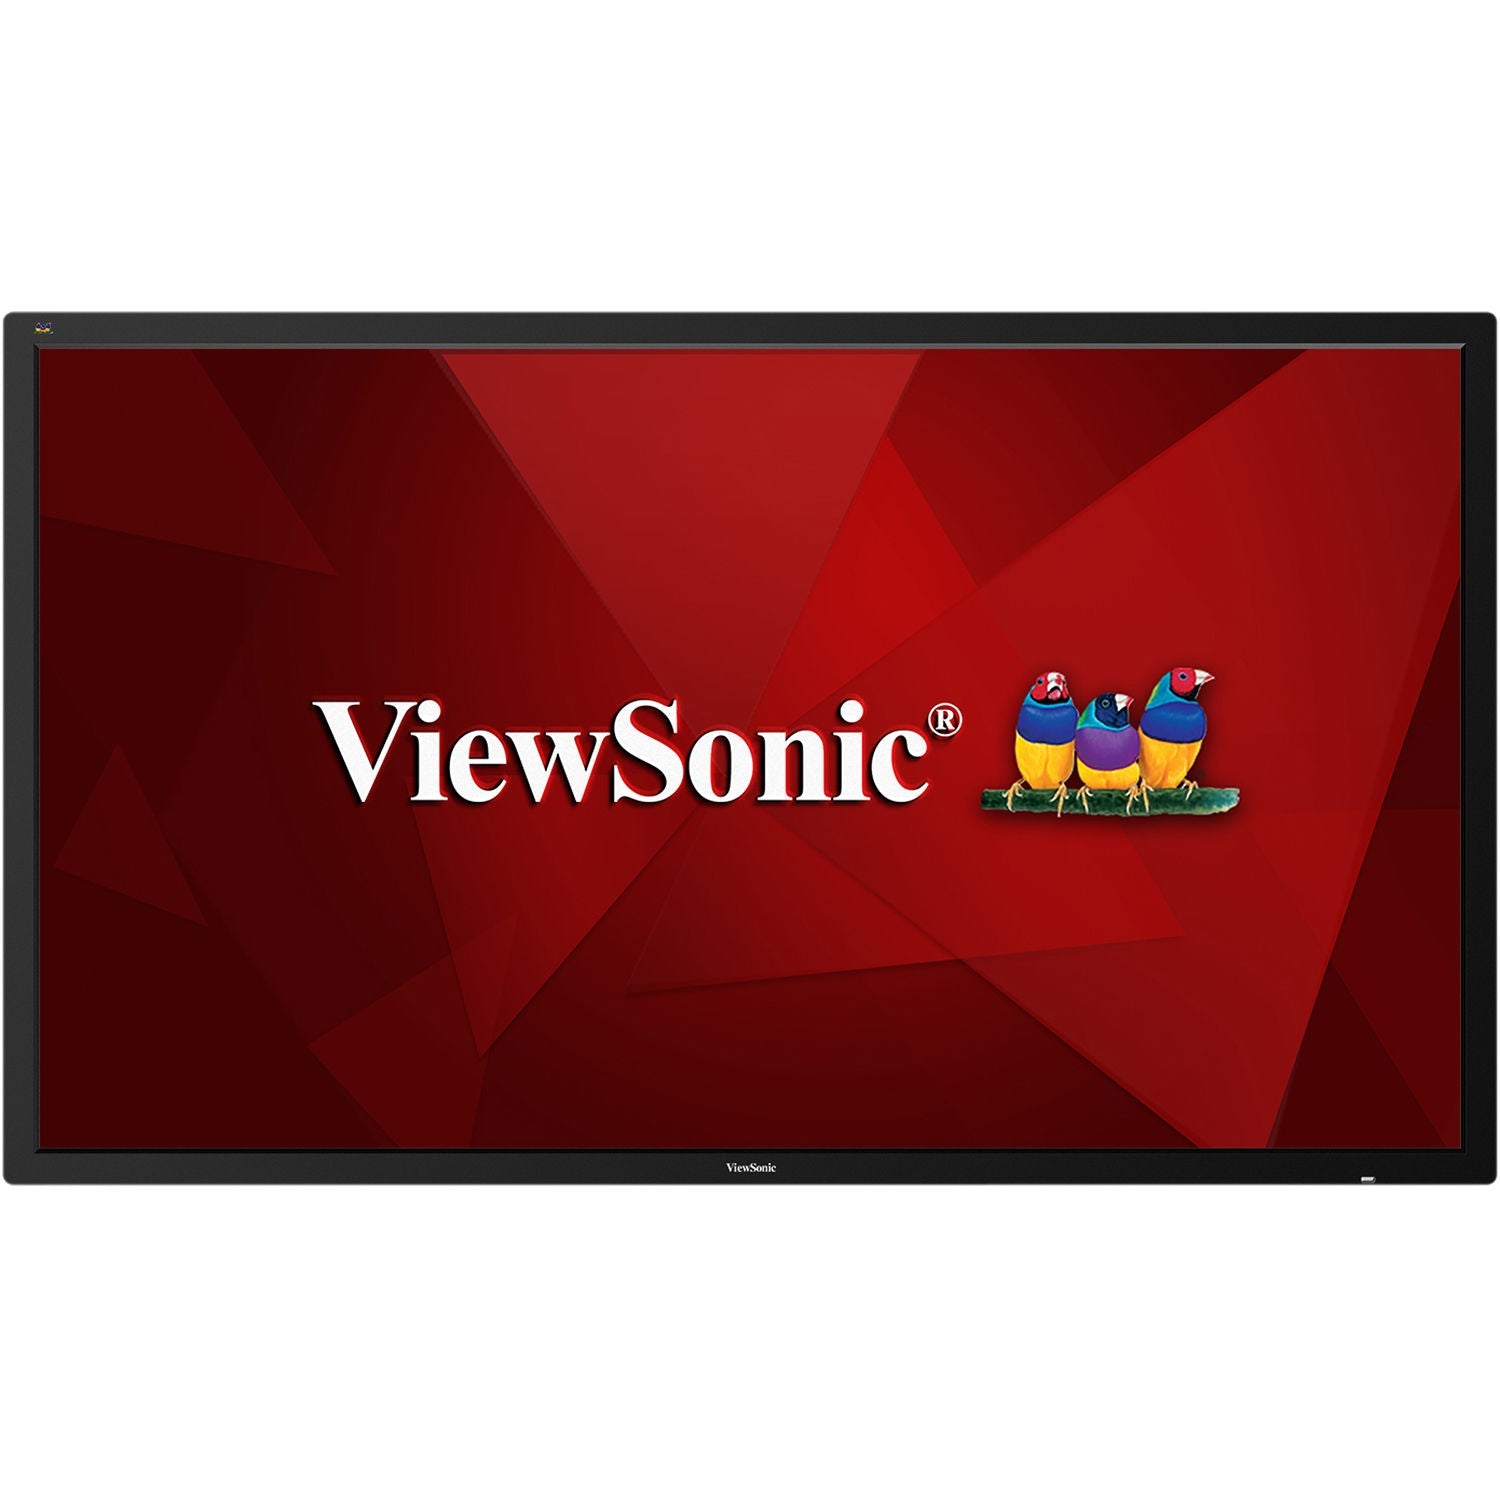 ViewSonic CDE7500-R 75" 4K Ultra HD Commercial LED Display - C Grade Refurbished